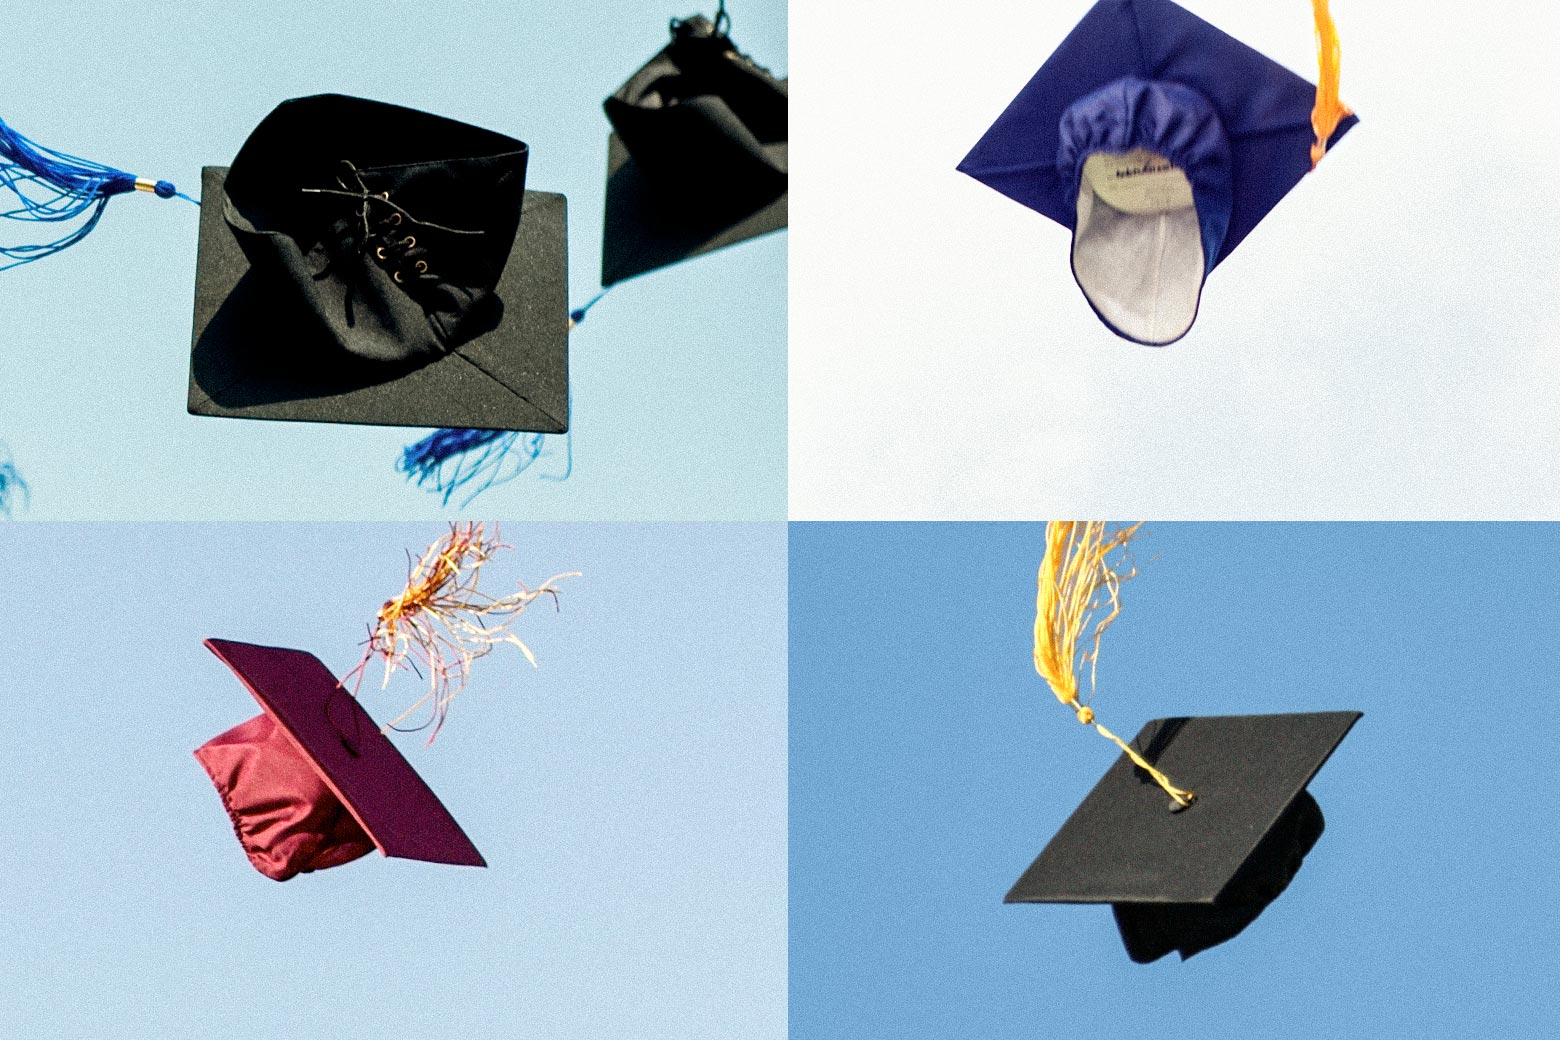 Four graduation caps have been tossed into the air.